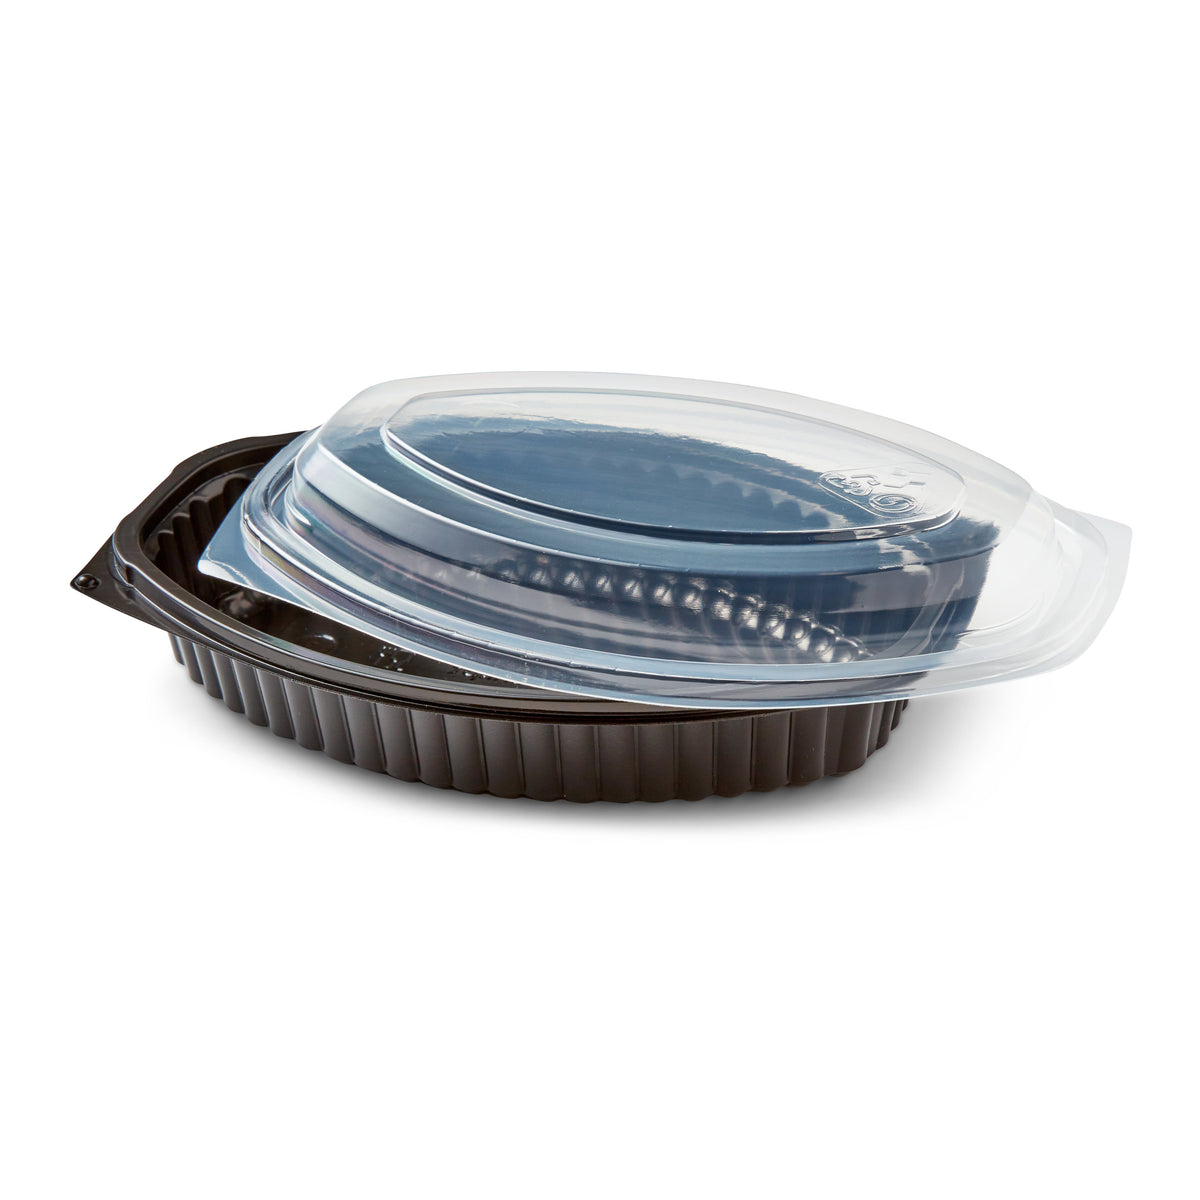 20 x 520 ml (18.3 ounce) Microwavable Meal Prep Hot Food Containers & Lids (207mm x 143mm x 59mm)